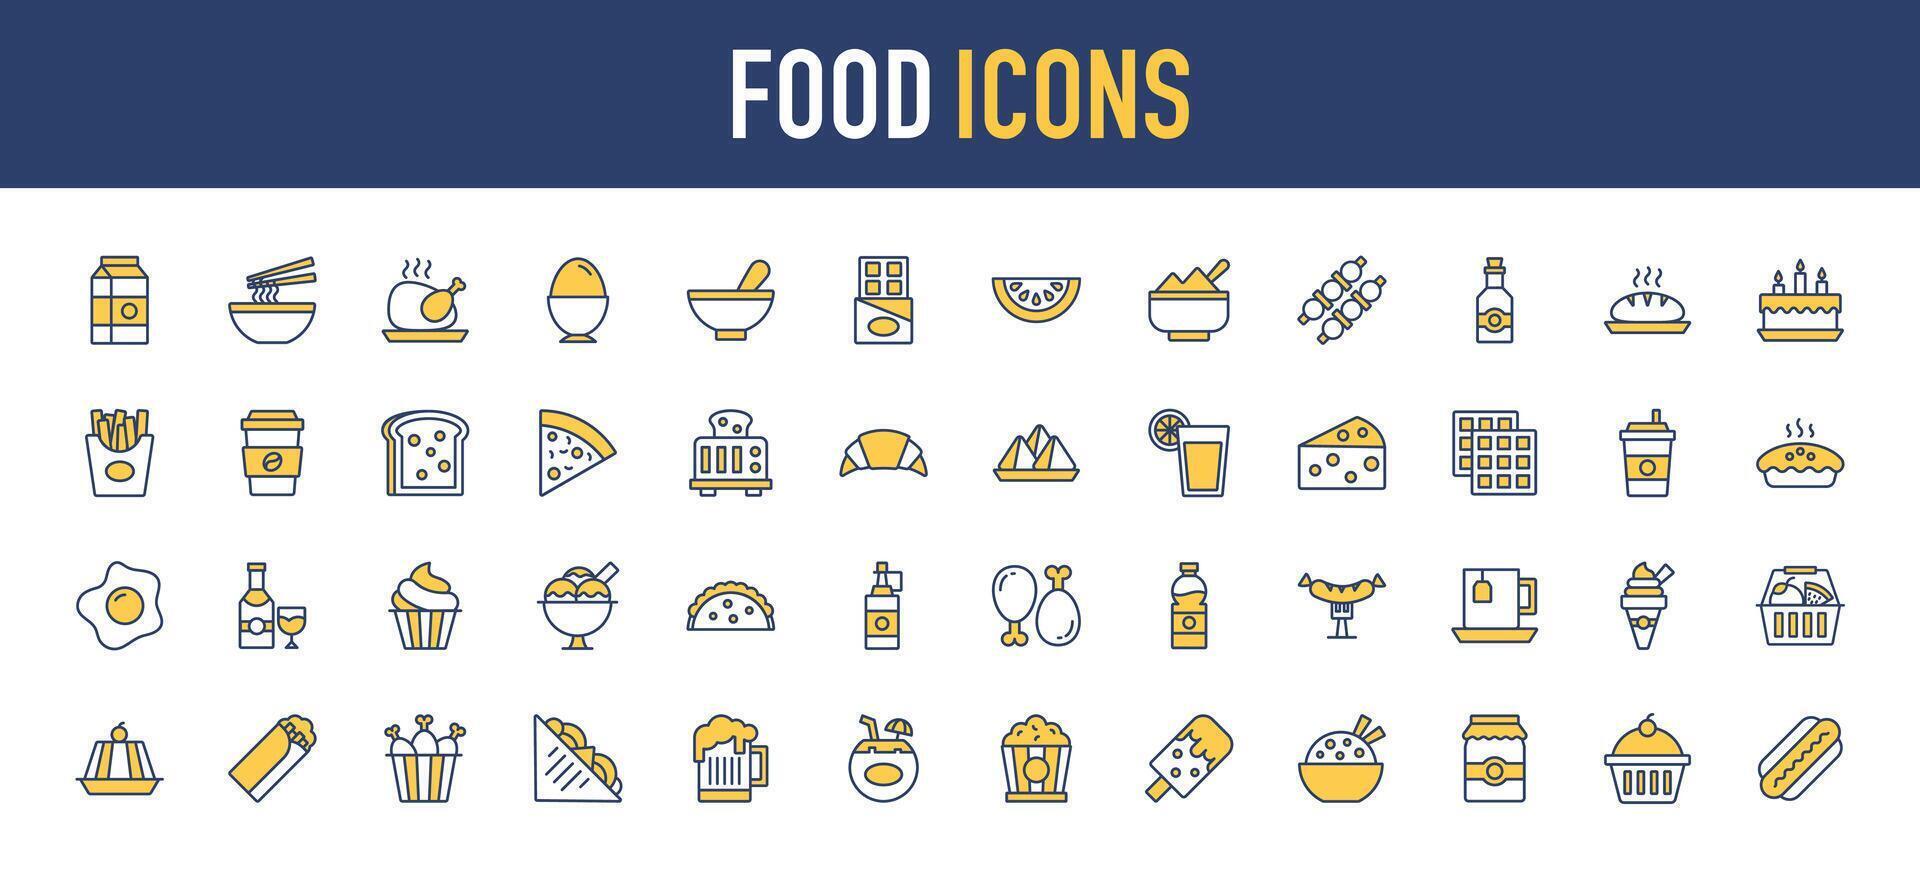 Food Icons. Meat, milk, seafood, pasta, soup, bread, egg, cake, sweets, fruits, vegetables, drinks, nutrition, pizza, fish, sauce, cheese, butter, pie, nuts, snacks Vector icon illustration.